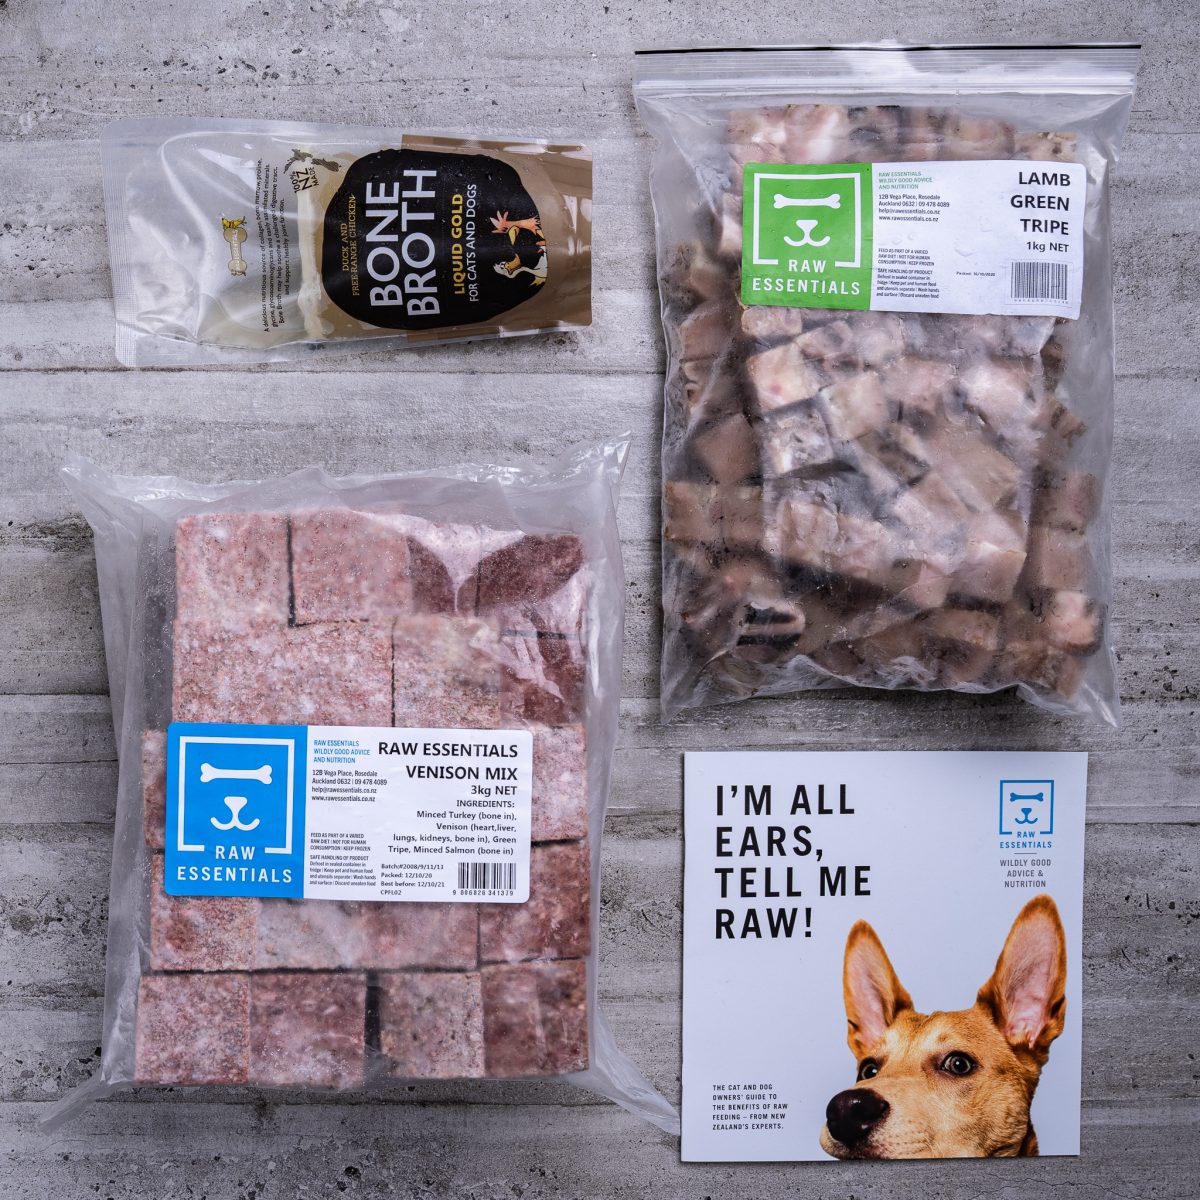 Assortment Of Raw Essential Products For Dogs Including, Bone Broth, 1KG Plastic Pack Of Small Cubed Lamb And Green Tripe Meat Mix, 3KG Plastic Pack Of Cubed Lamb Meat Mix, Raw Essentials Advice And Nutrition Pamphlet